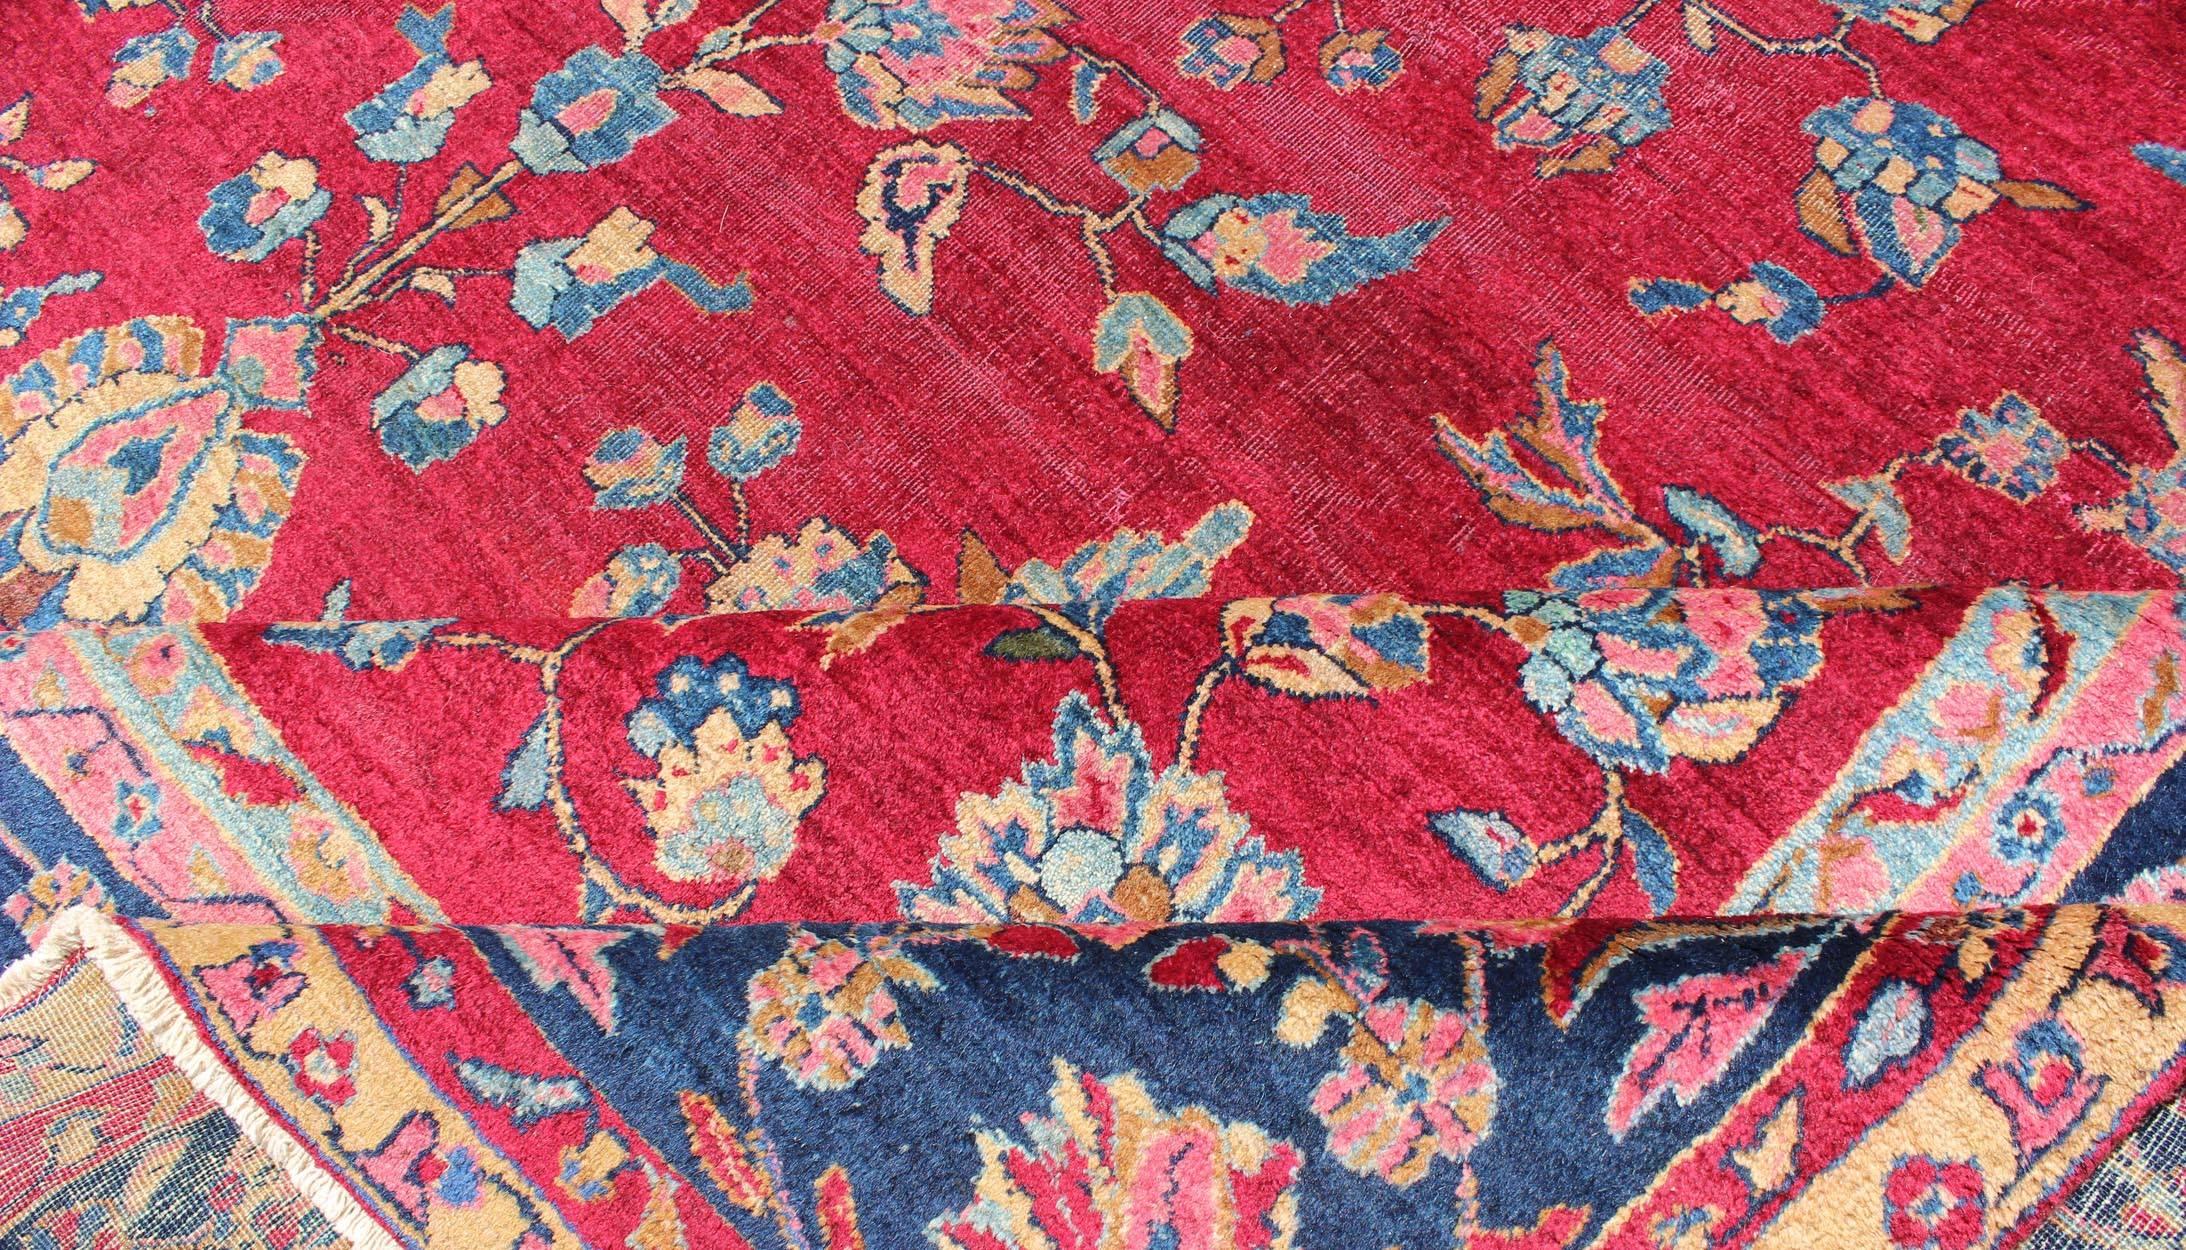 All-Over Floral Design Antique Indian Amritsar Rug in Red and Blue Tones For Sale 5